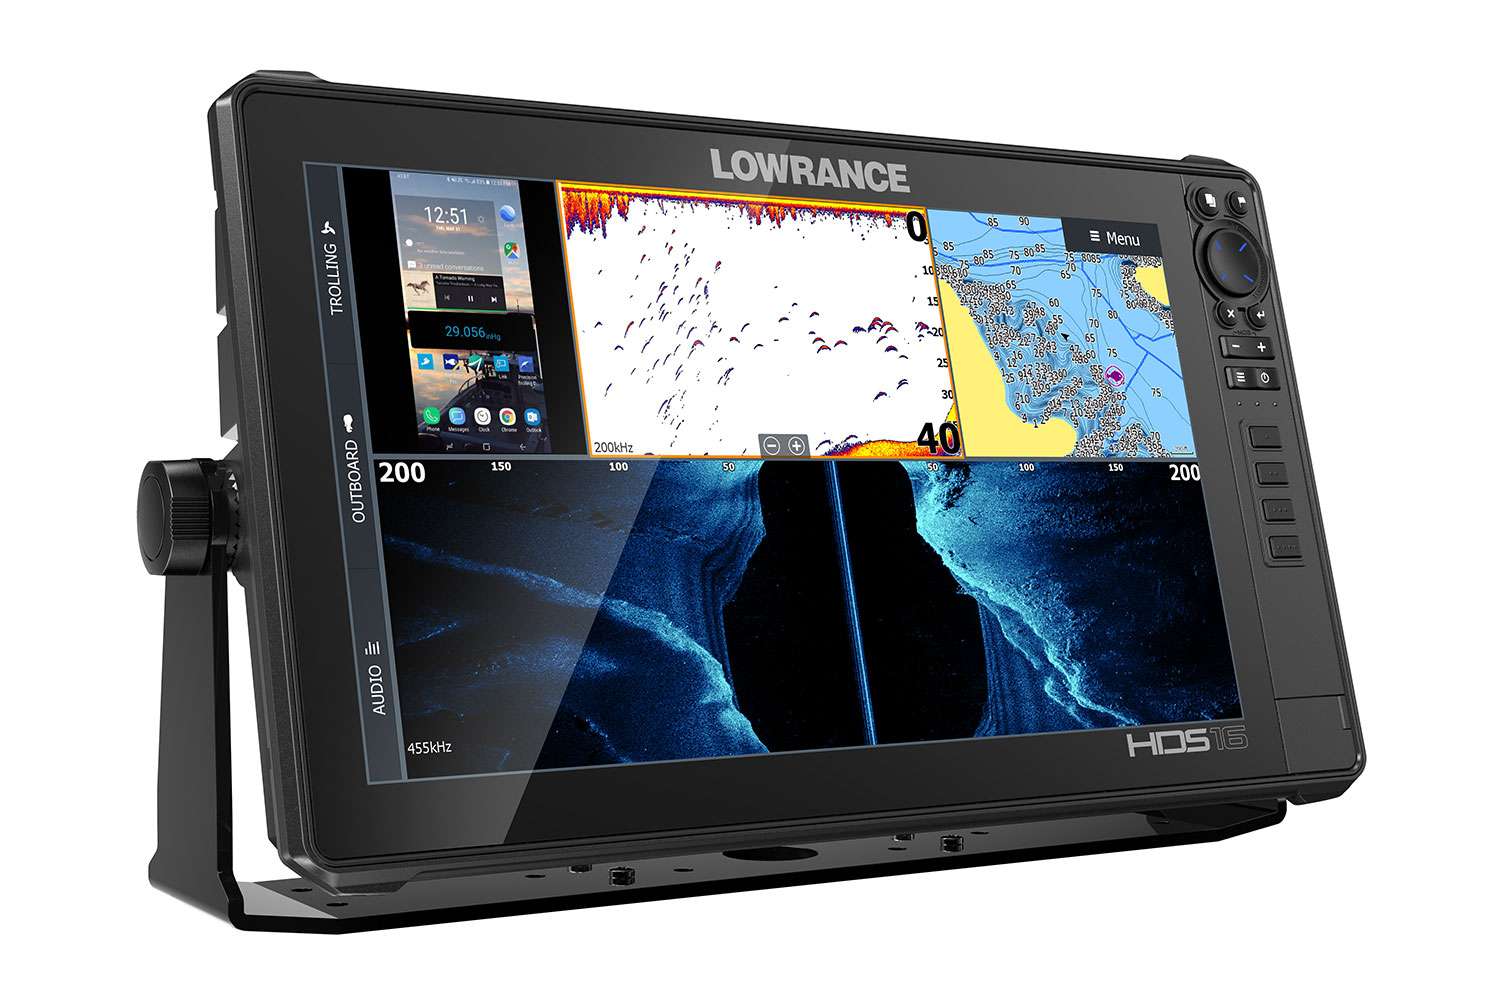 <p><b>Lowrance HDS Live, $949-$4,499</b></p> HDS Live allows anglers to display important fishing information and entertainment from their smartphones on their 12- and 16-inch sunlight viewable displays. Users can view their smartphone in full-screen or split-screen windows via HDMI connection allowing them to stream video, view Google Maps and fishing data on the HDS Live touchscreen â all while their phone is safely stowed. </p> <p>HDS Live features a stunning new low-profile design with edge-to-edge glass; a SolarMax HD screen; bracket, flush and rear mounting options; user-programmable keys; and an optional fully-programmable Bluetooth remote. Available in 7-, 9-, 12- and 16-inch display sizes, HDS Live ranges in price from $949 to $4,499. Active Imaging can be purchased as a bundle with HDS Live or as a separate accessory for $299; the LiveSight transducer is priced at $999. <br> <a href=